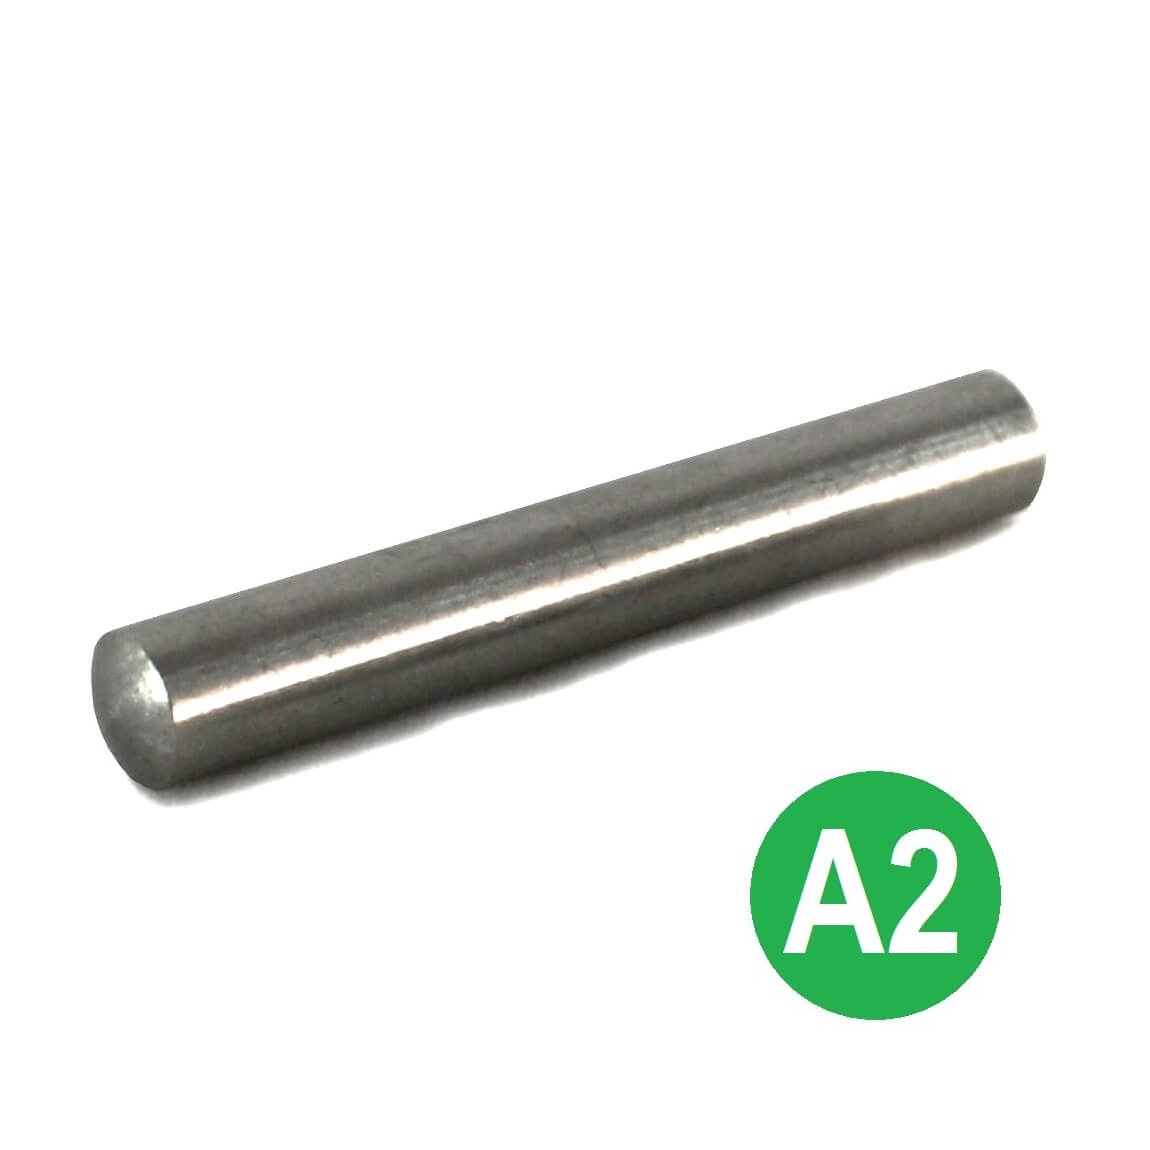 4mm Dia x 30mm A2 Stainless Dowel Pins DIN 7